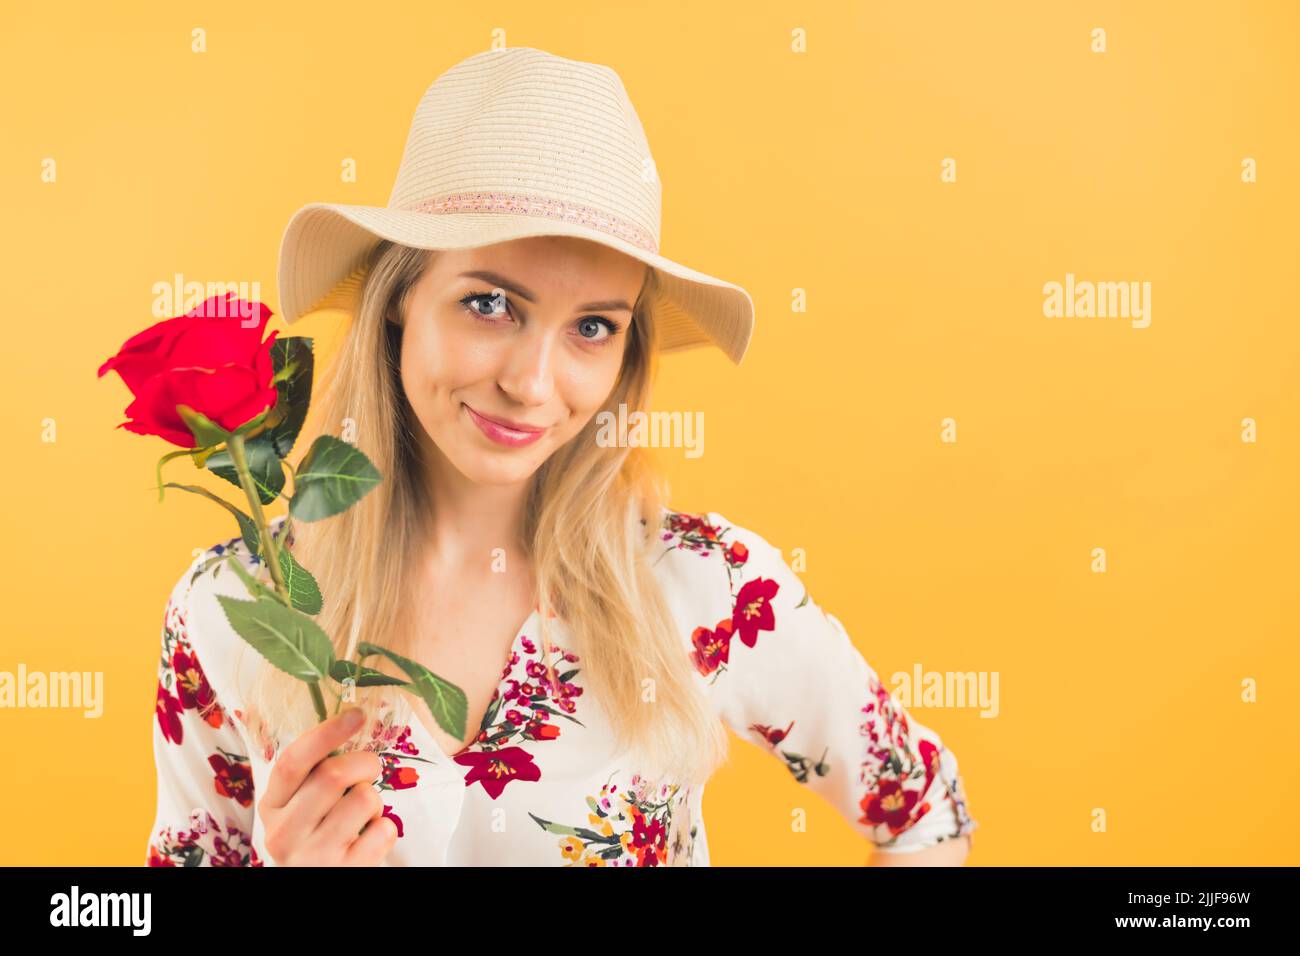 A blondie girl wearing a hat and holding a beautiful rose on an orange background looking at the camera . High quality photo Stock Photo